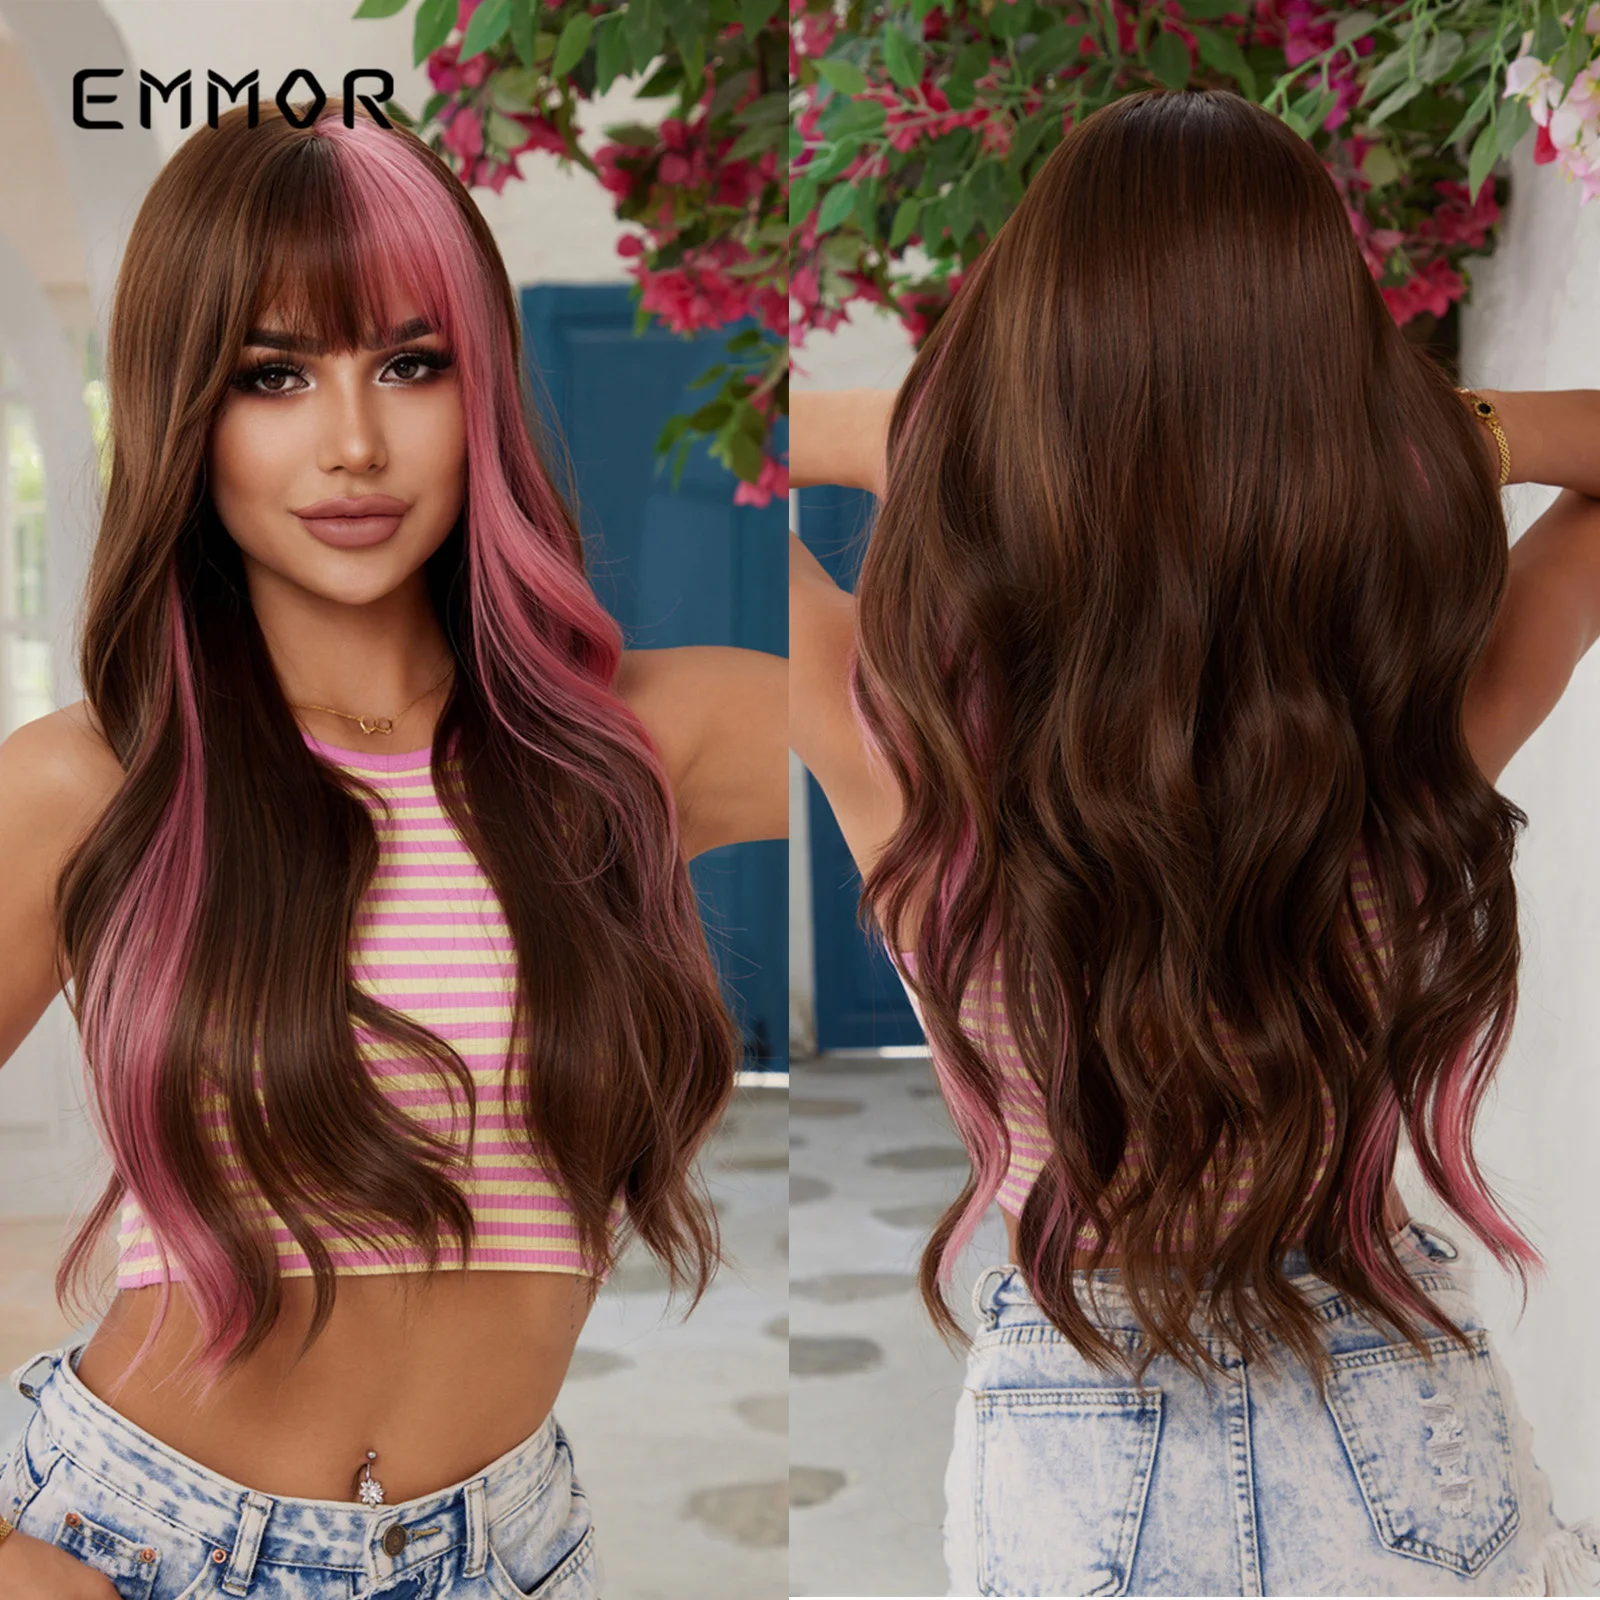 

Emmor Youthful Synthetic Wig Long Wavy Curly Ombre Blonde Mixed Pink Wigs for Women Heat Resistant Party Daily Hair Bang Natural